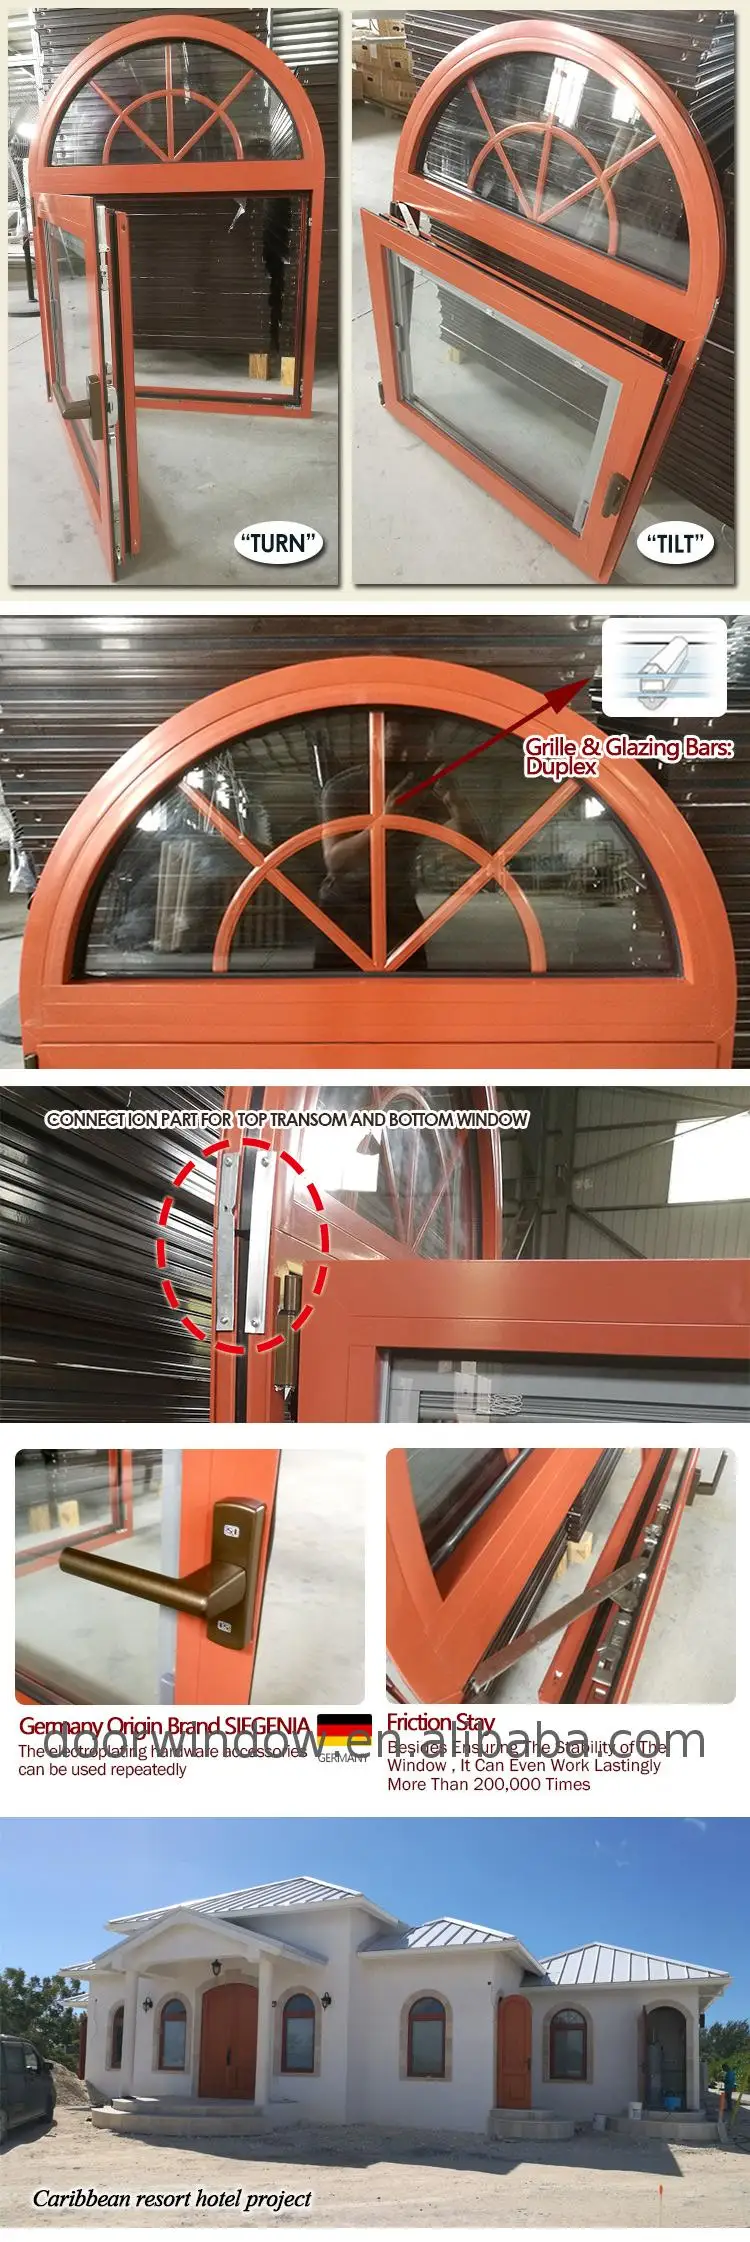 Wholesale window treatments for arched windows styles architecture shades curved